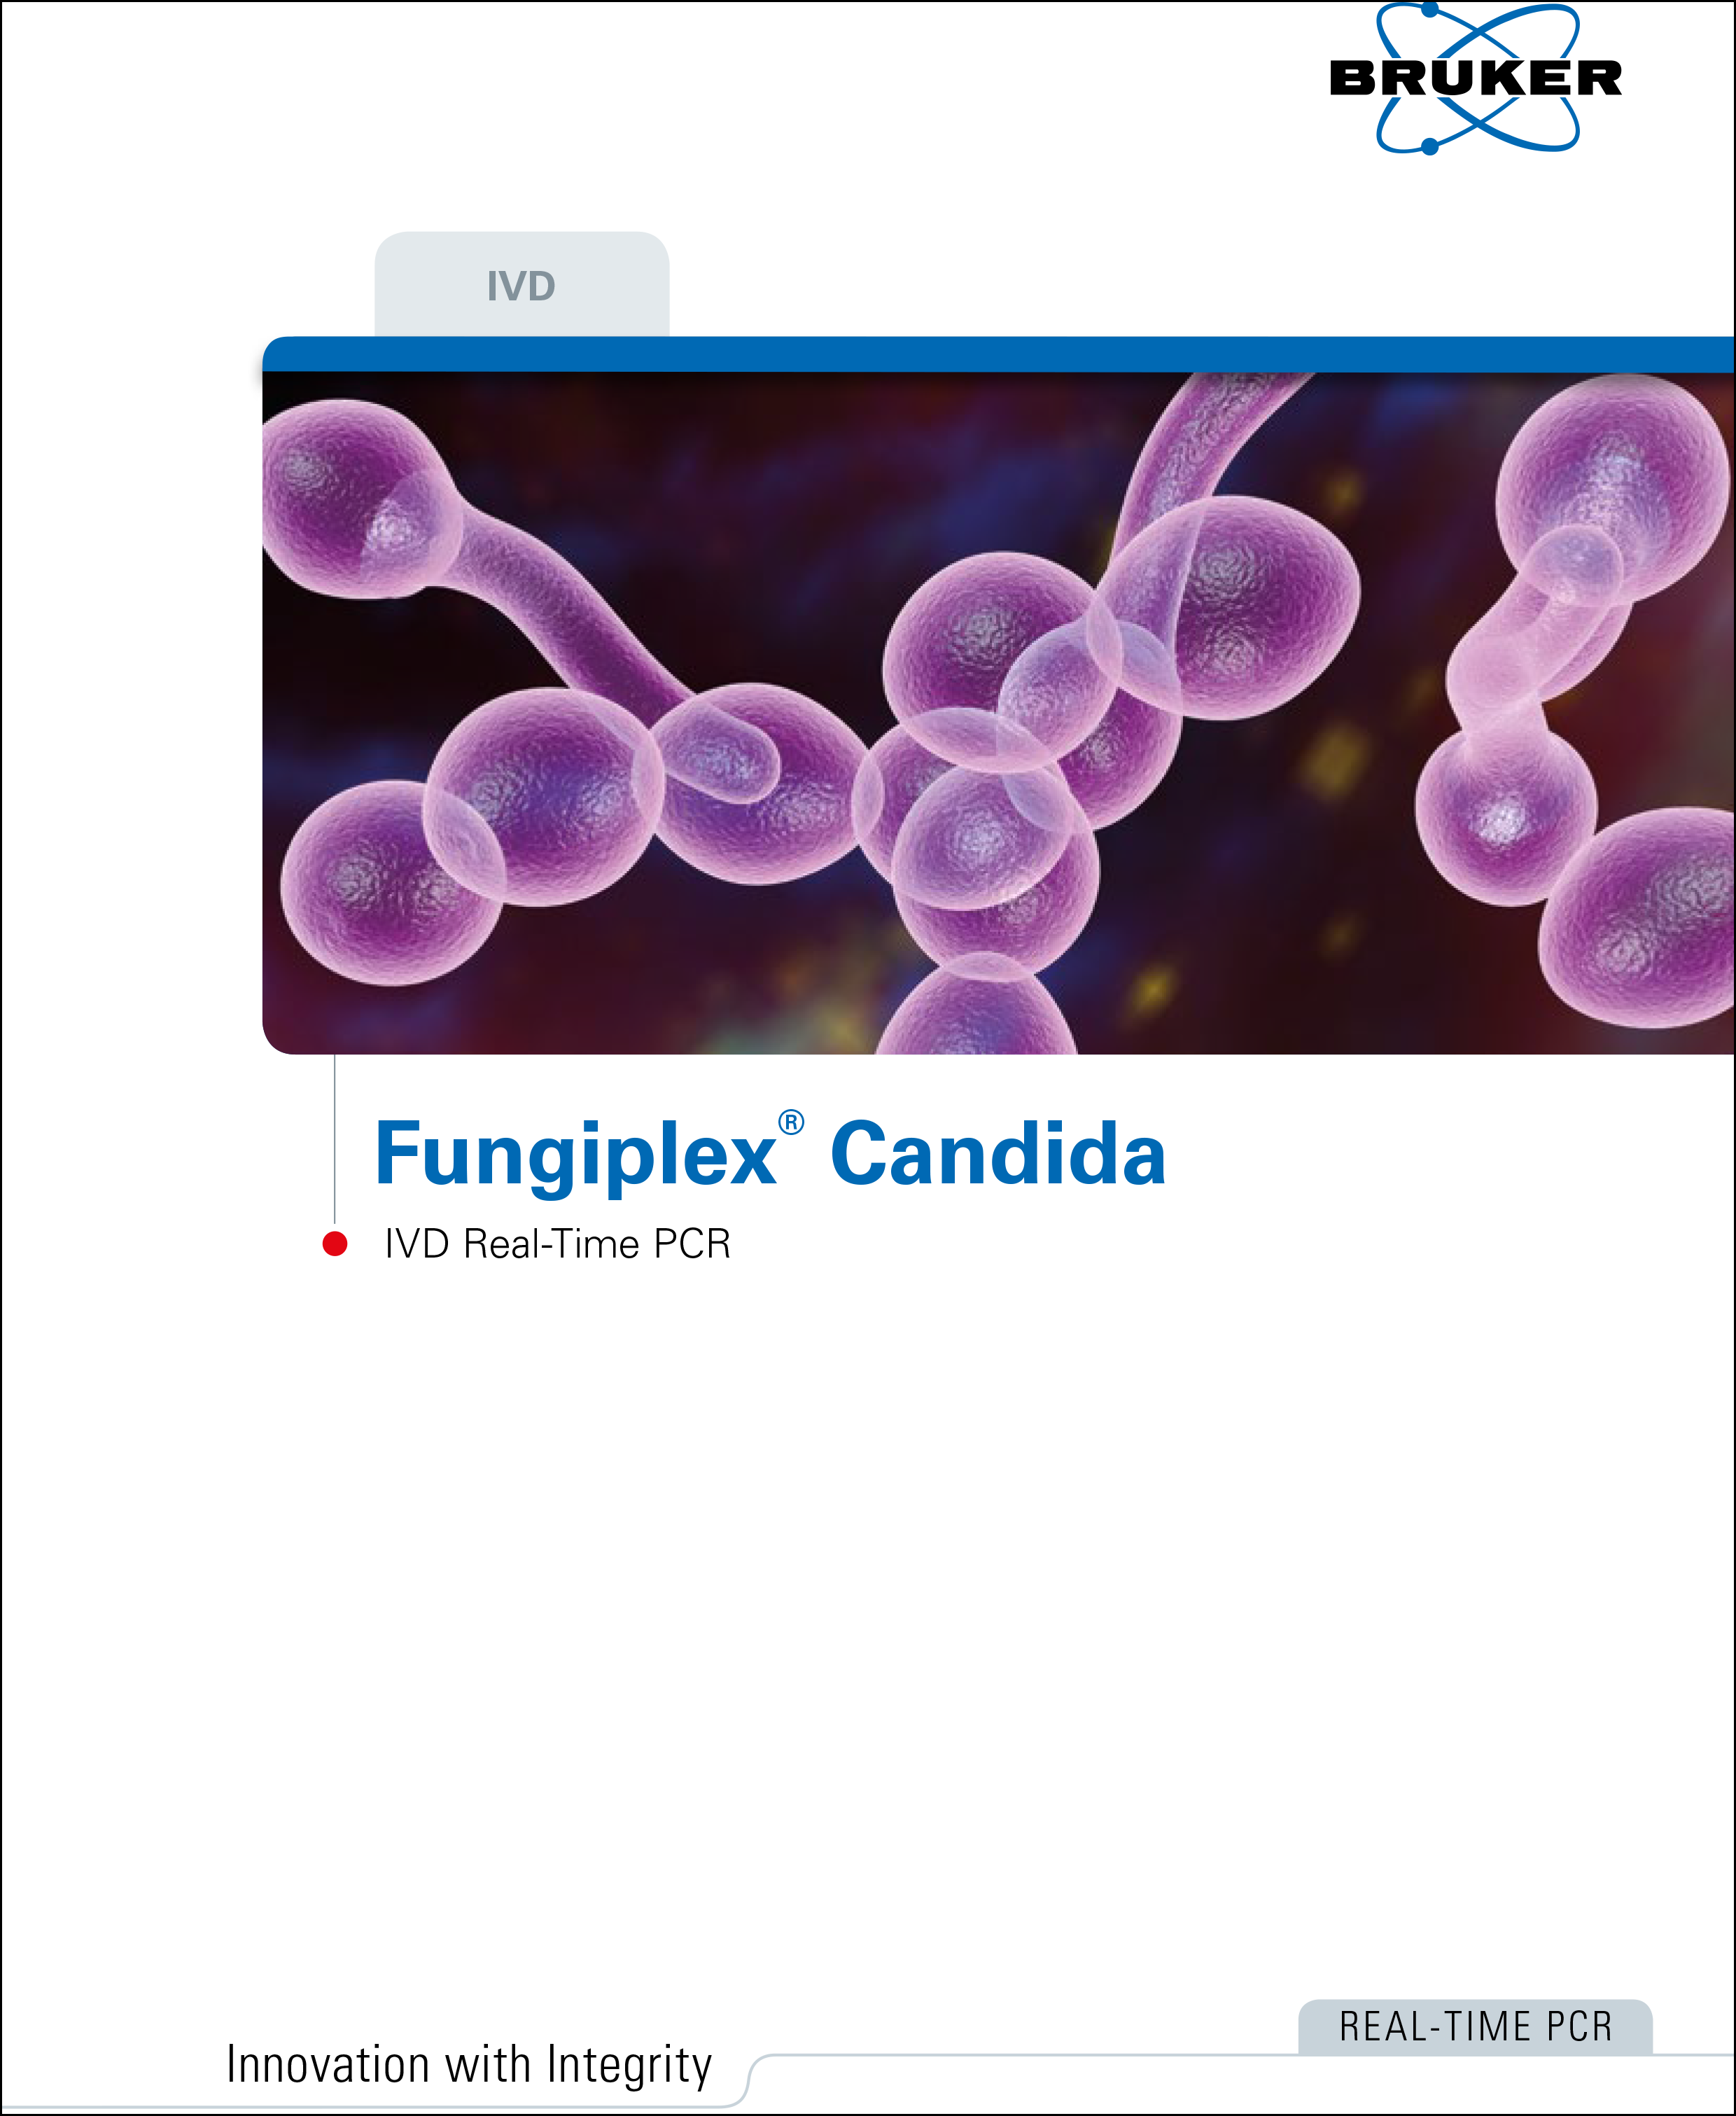 Fungiplex® Candida IVD Real-Time PCR Kit